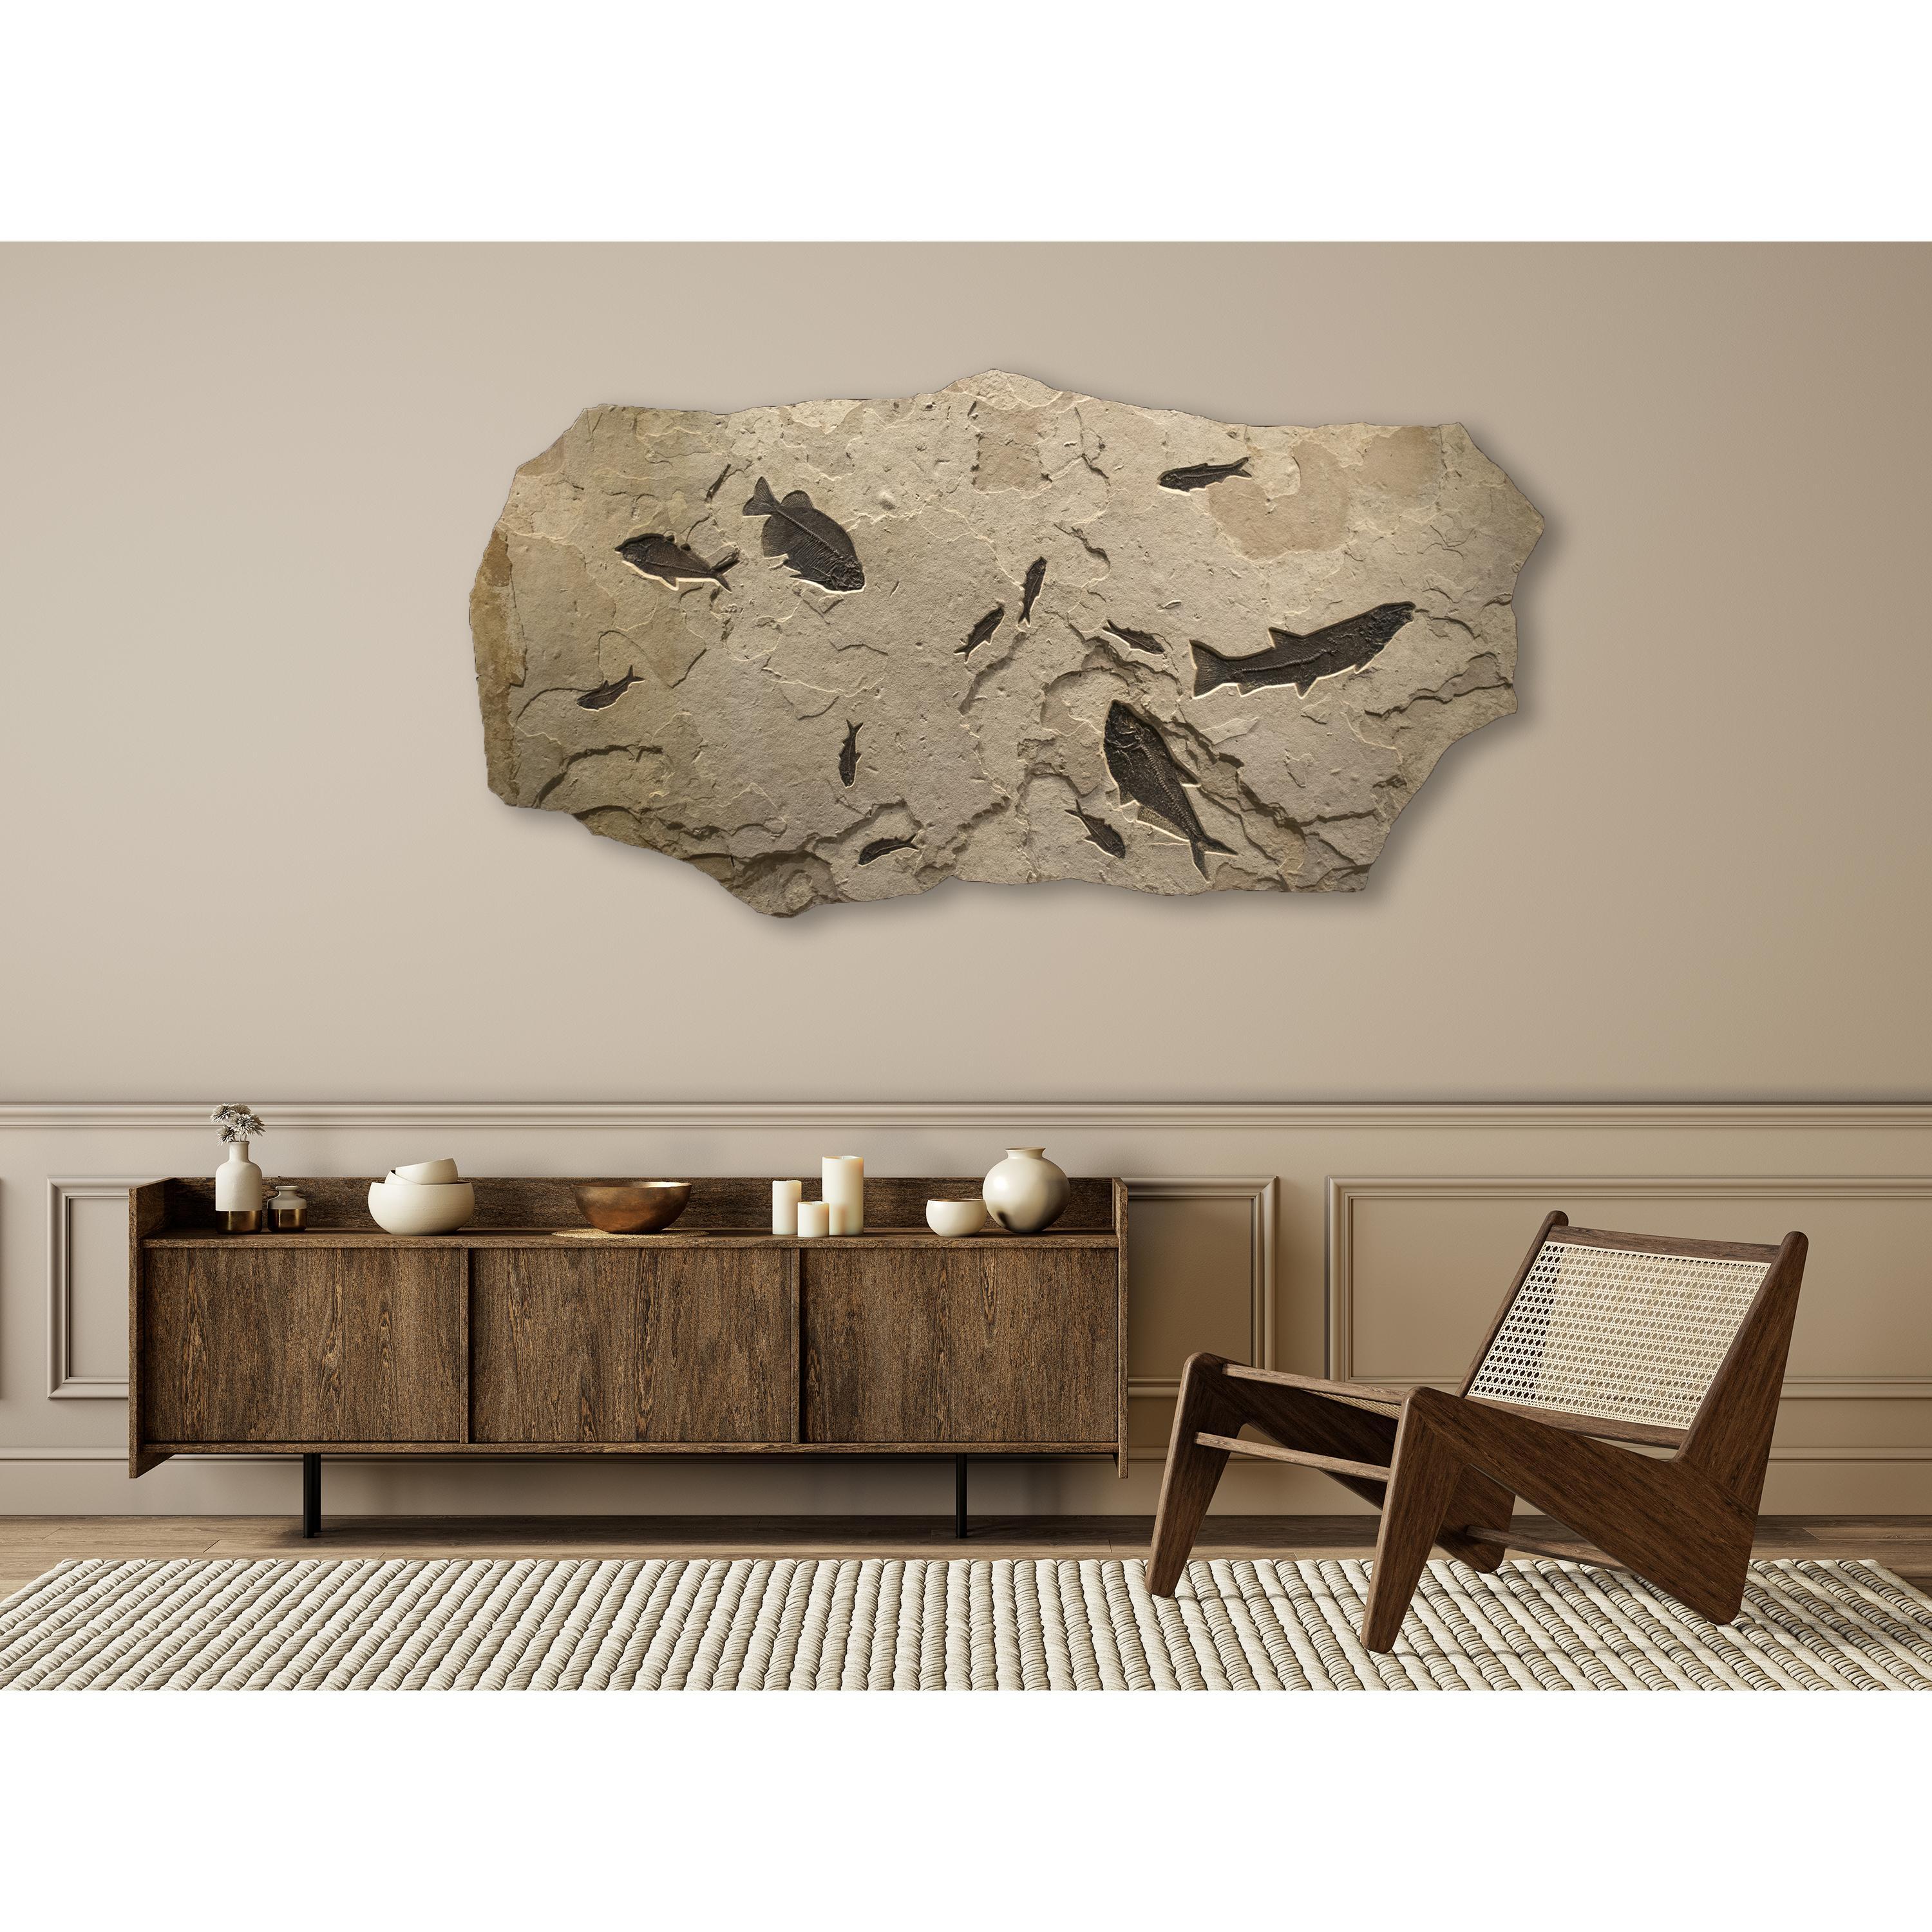 This exquisite piece of natural history makes an incredible statement and works beautifully with design styles ranging from traditional to modern. This sculptural fossil mural is populated with a beautiful array of fossil fish from the Green River